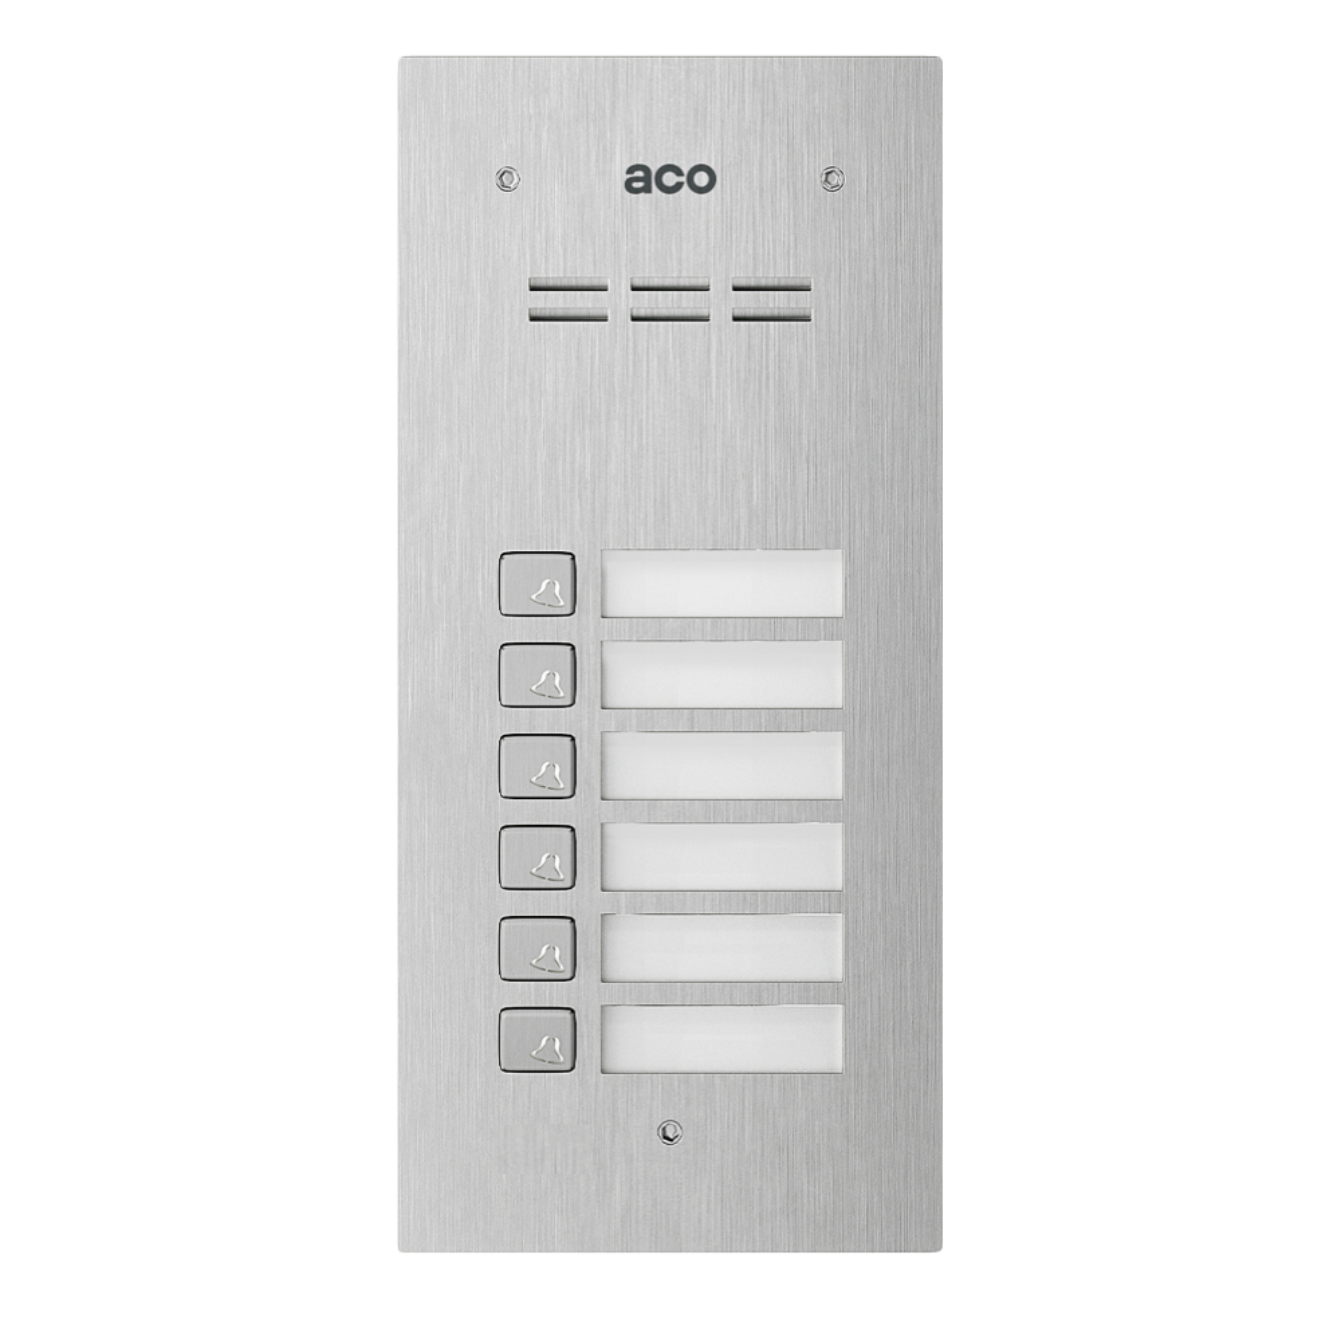 FAM-P-6NPACC Digital door entry panel with key fob reader and 6 buttons